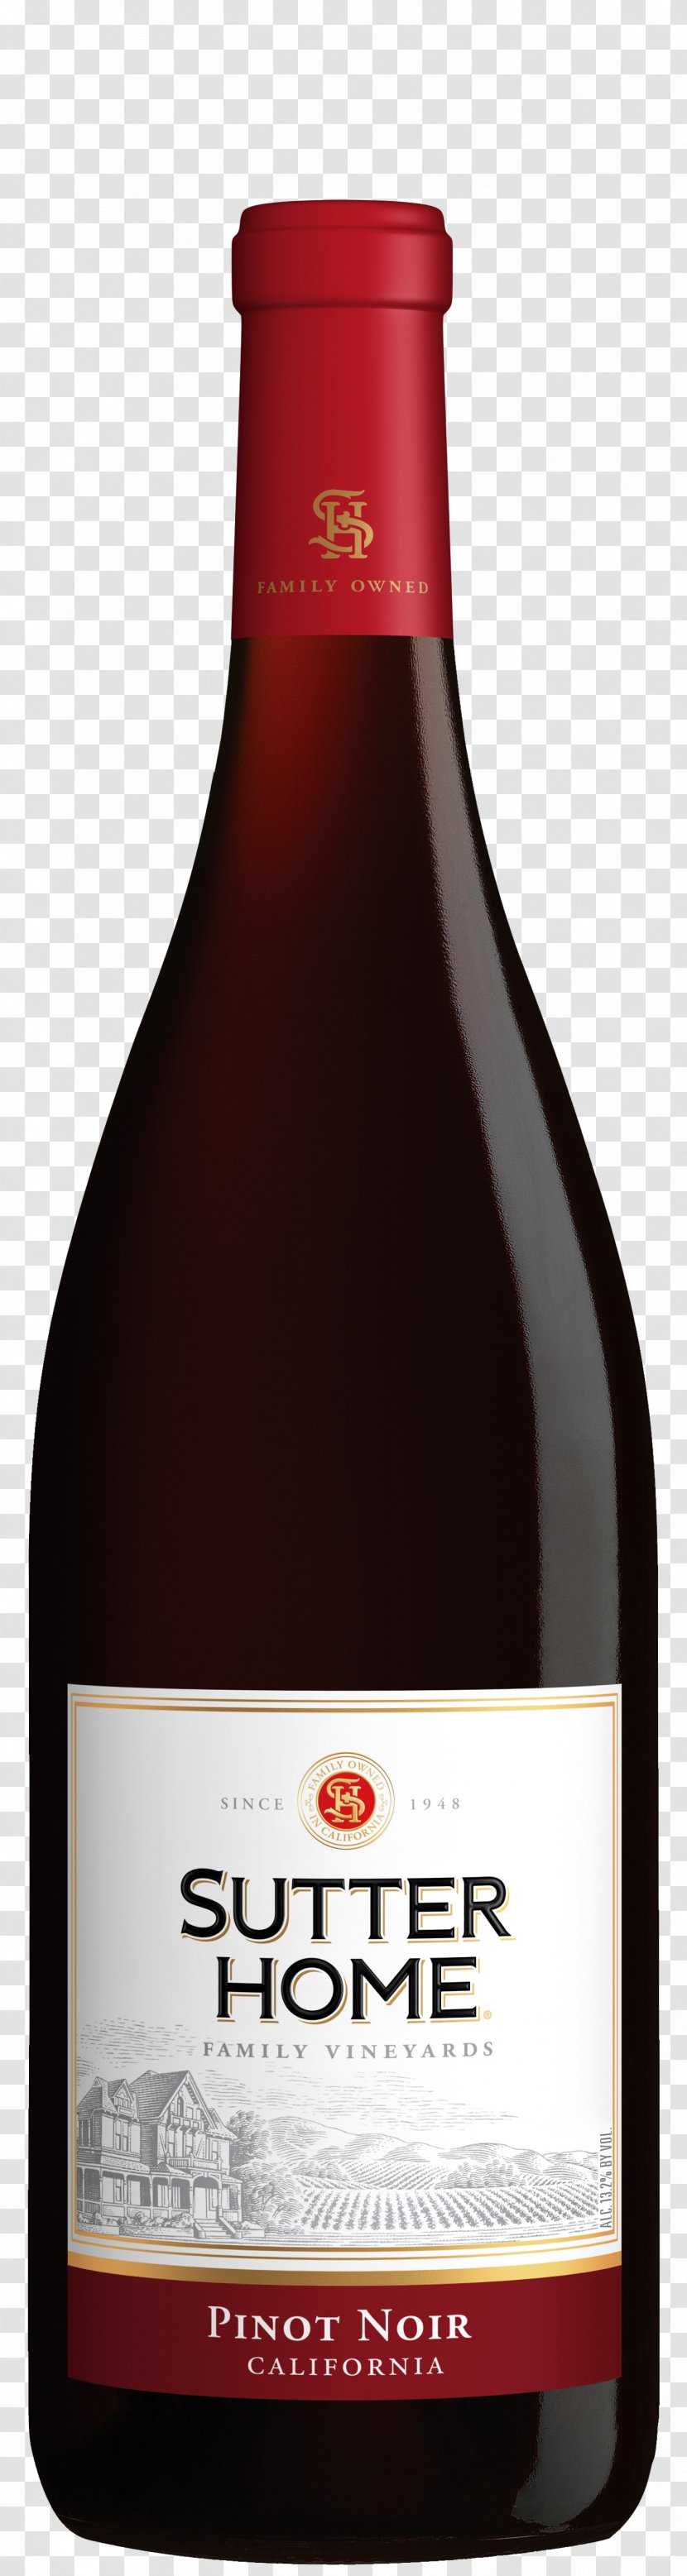 2006 Sutter Home Pinot Noir Red Wine Chardonnay - Alcoholic Beverage Transparent PNG